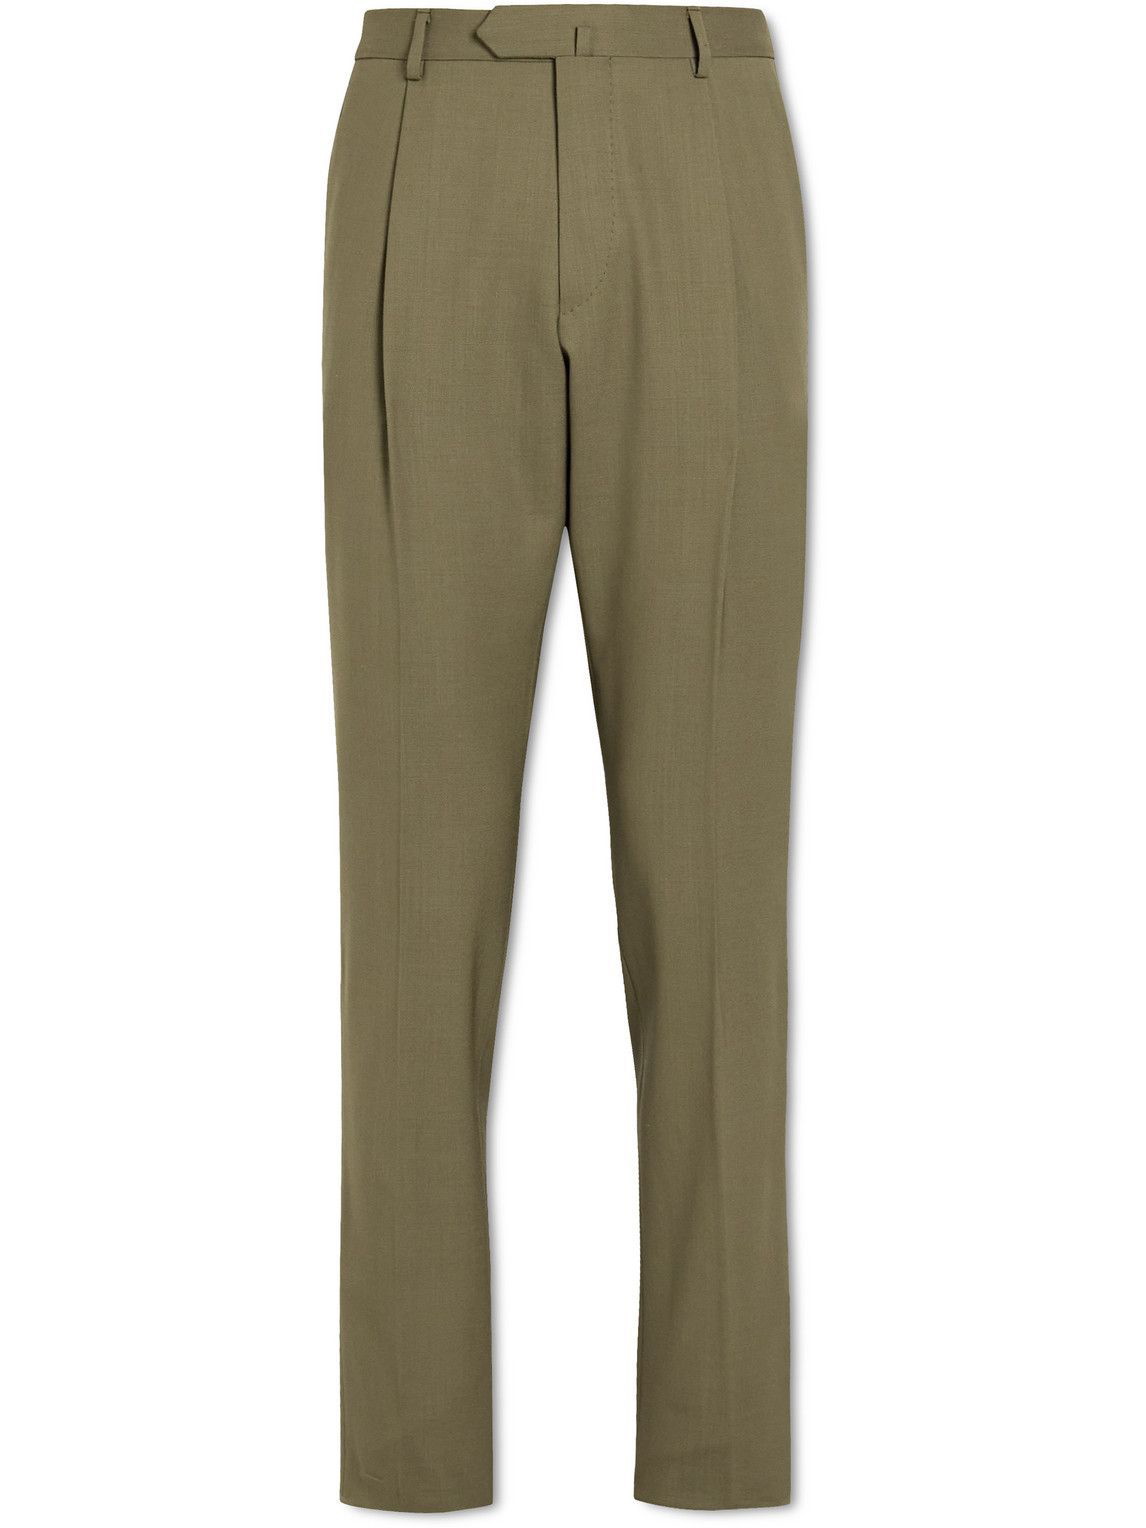 Caruso - Tosca Slim-Fit Pleated Wool Suit Trousers - Green Caruso